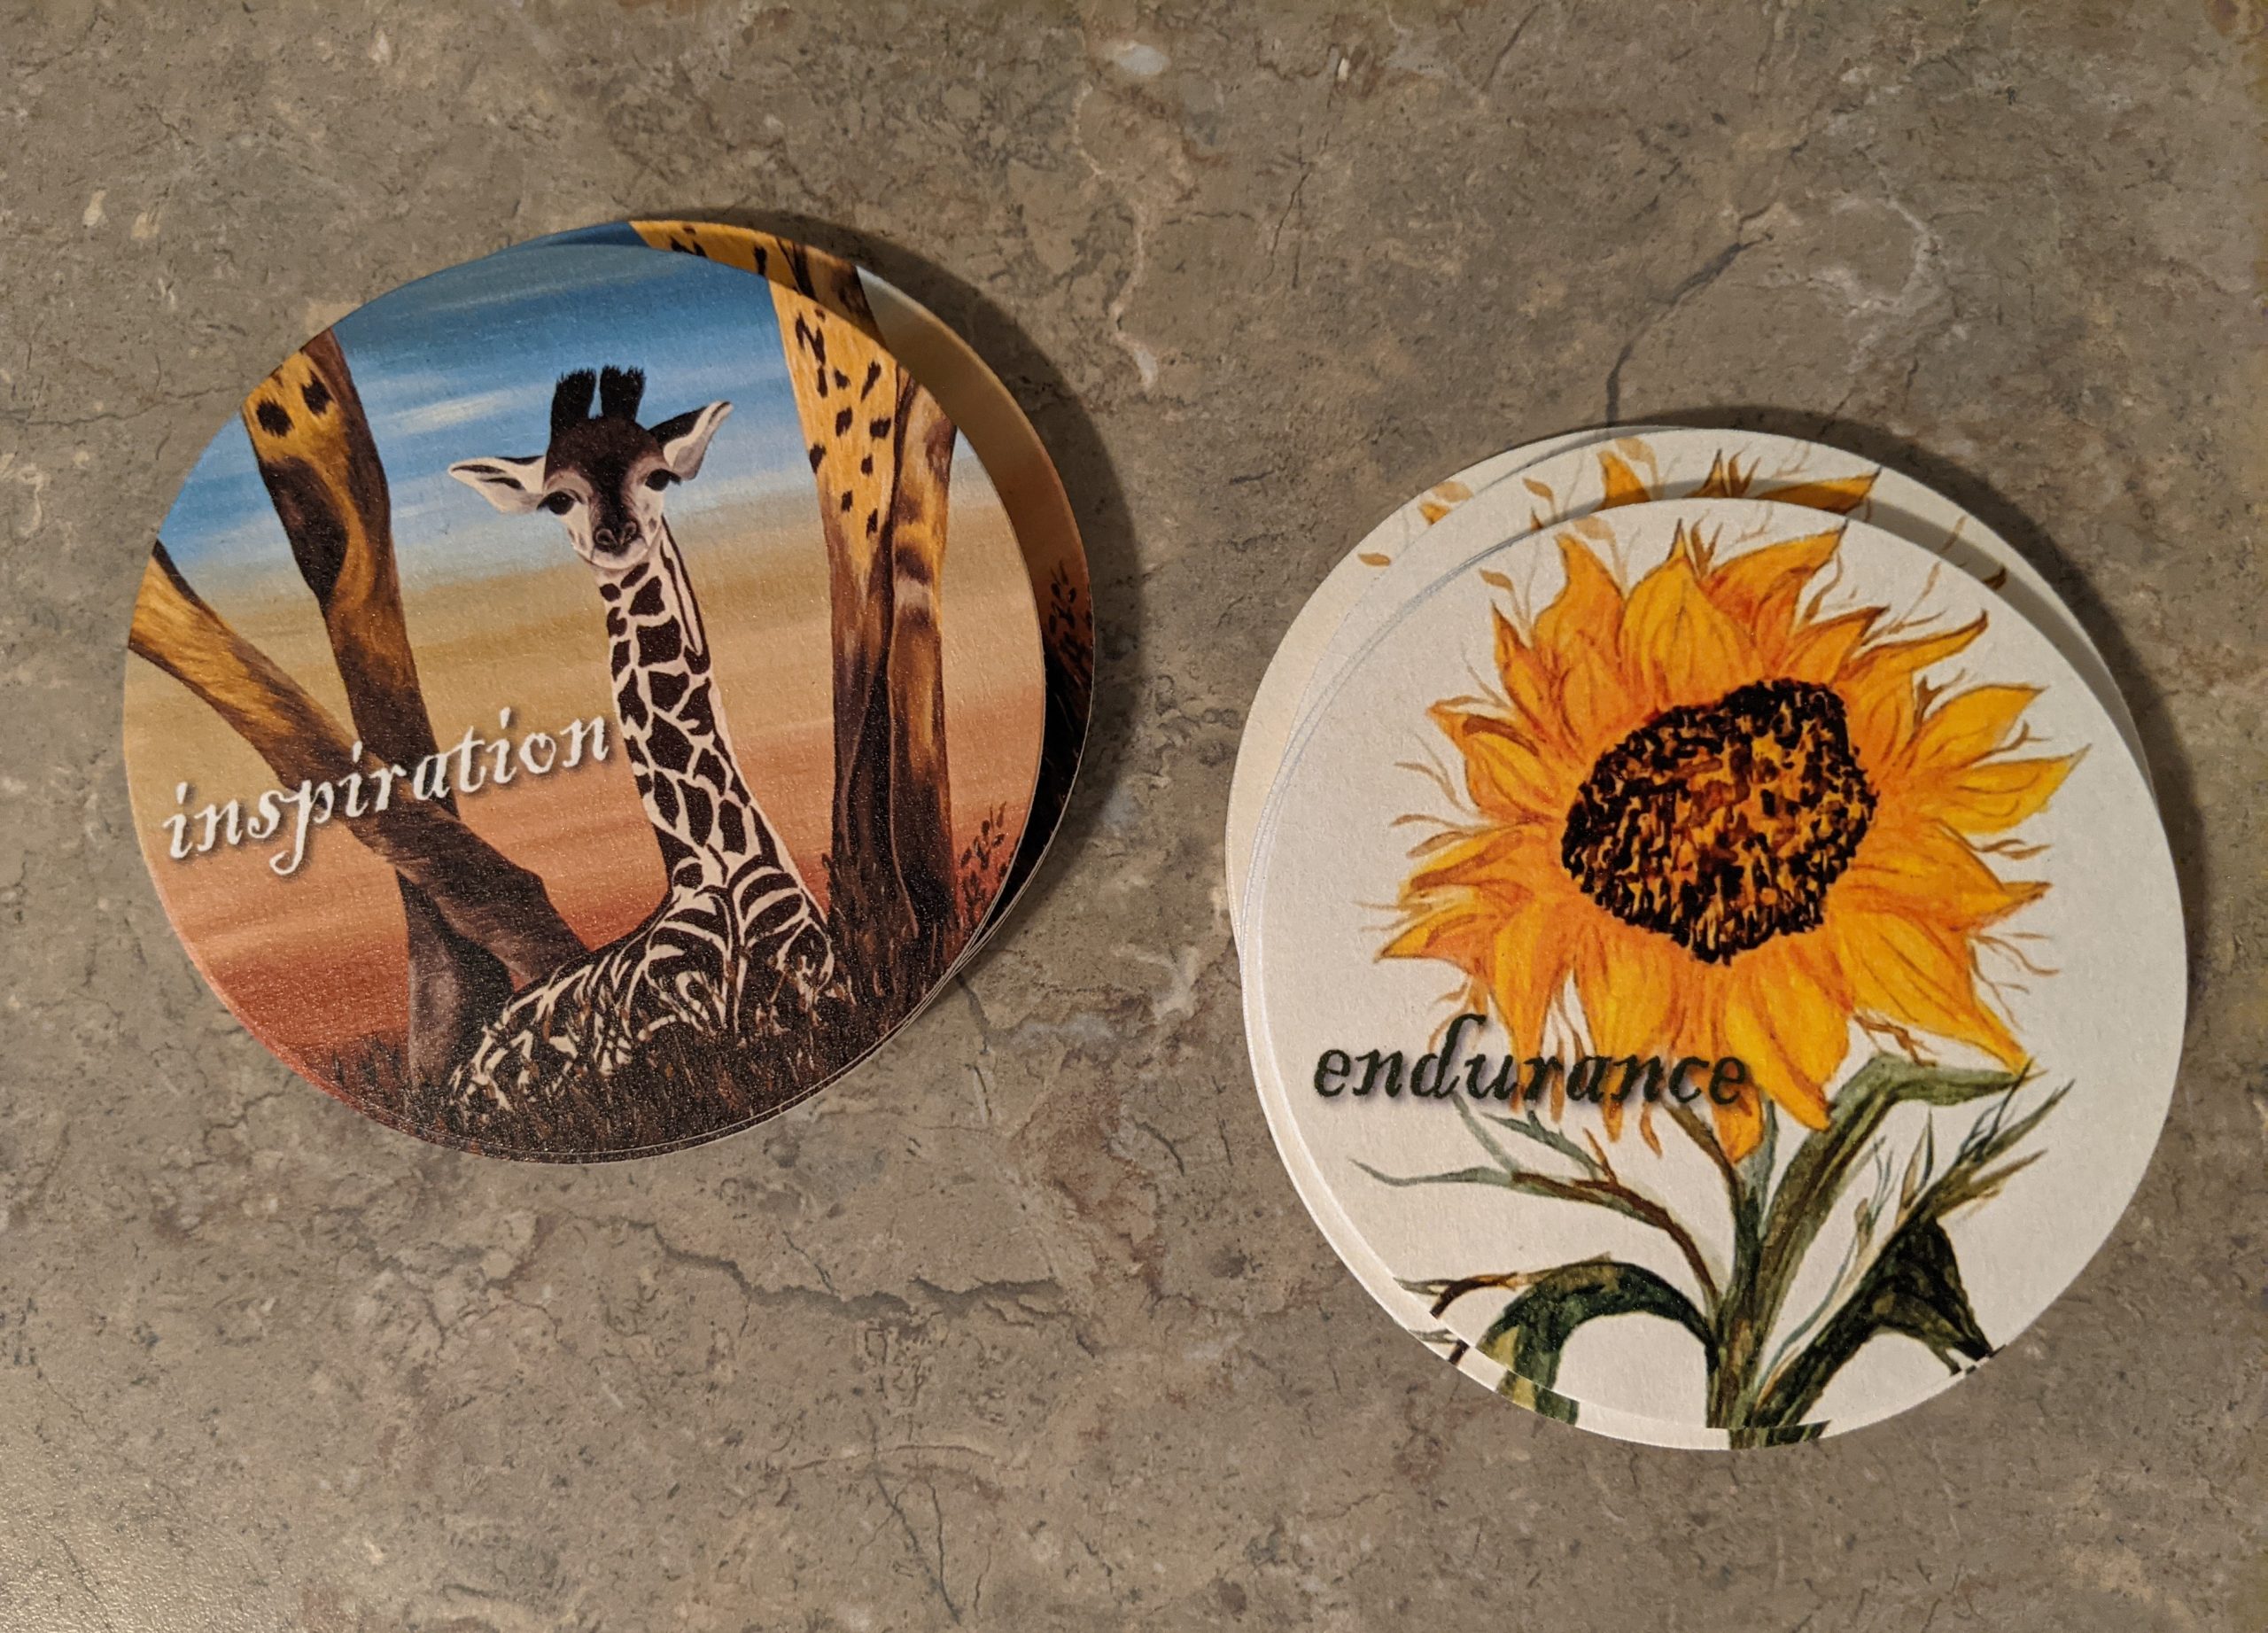 Two painted coasters, one with a giraffe and the other with a sunflower